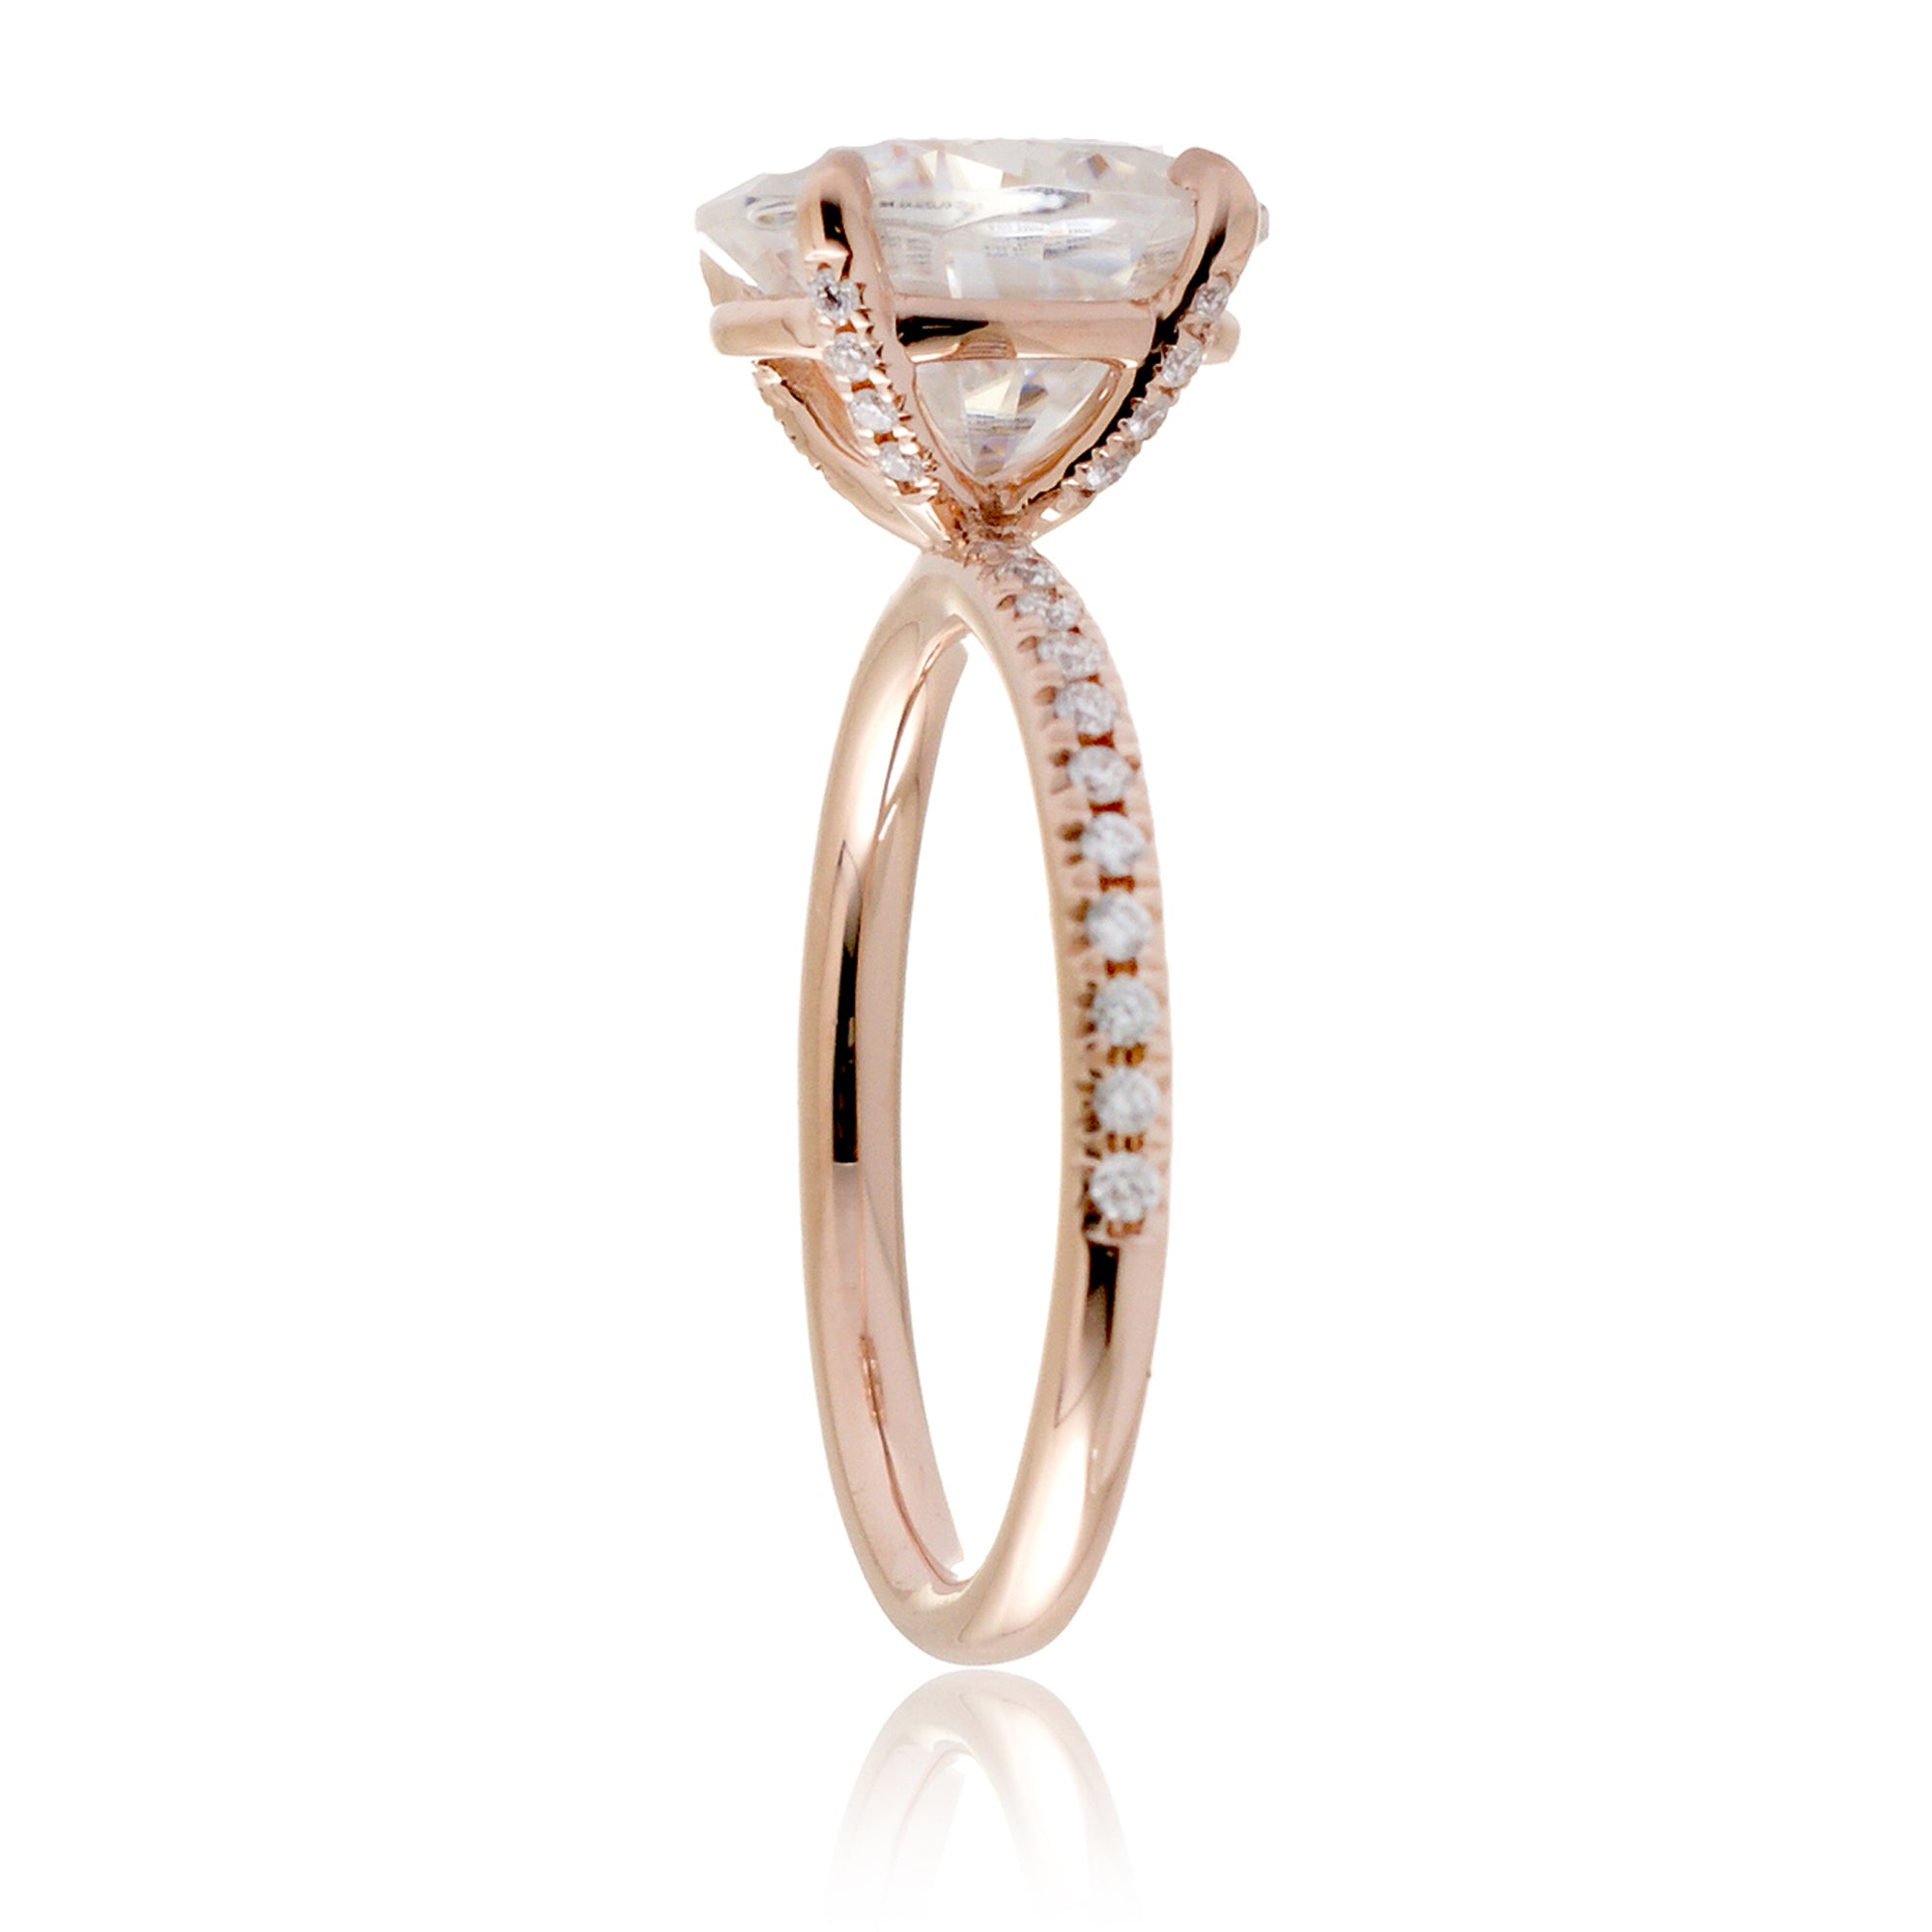 Oval cut moissanite diamond band engagement ring rose gold - The Ava